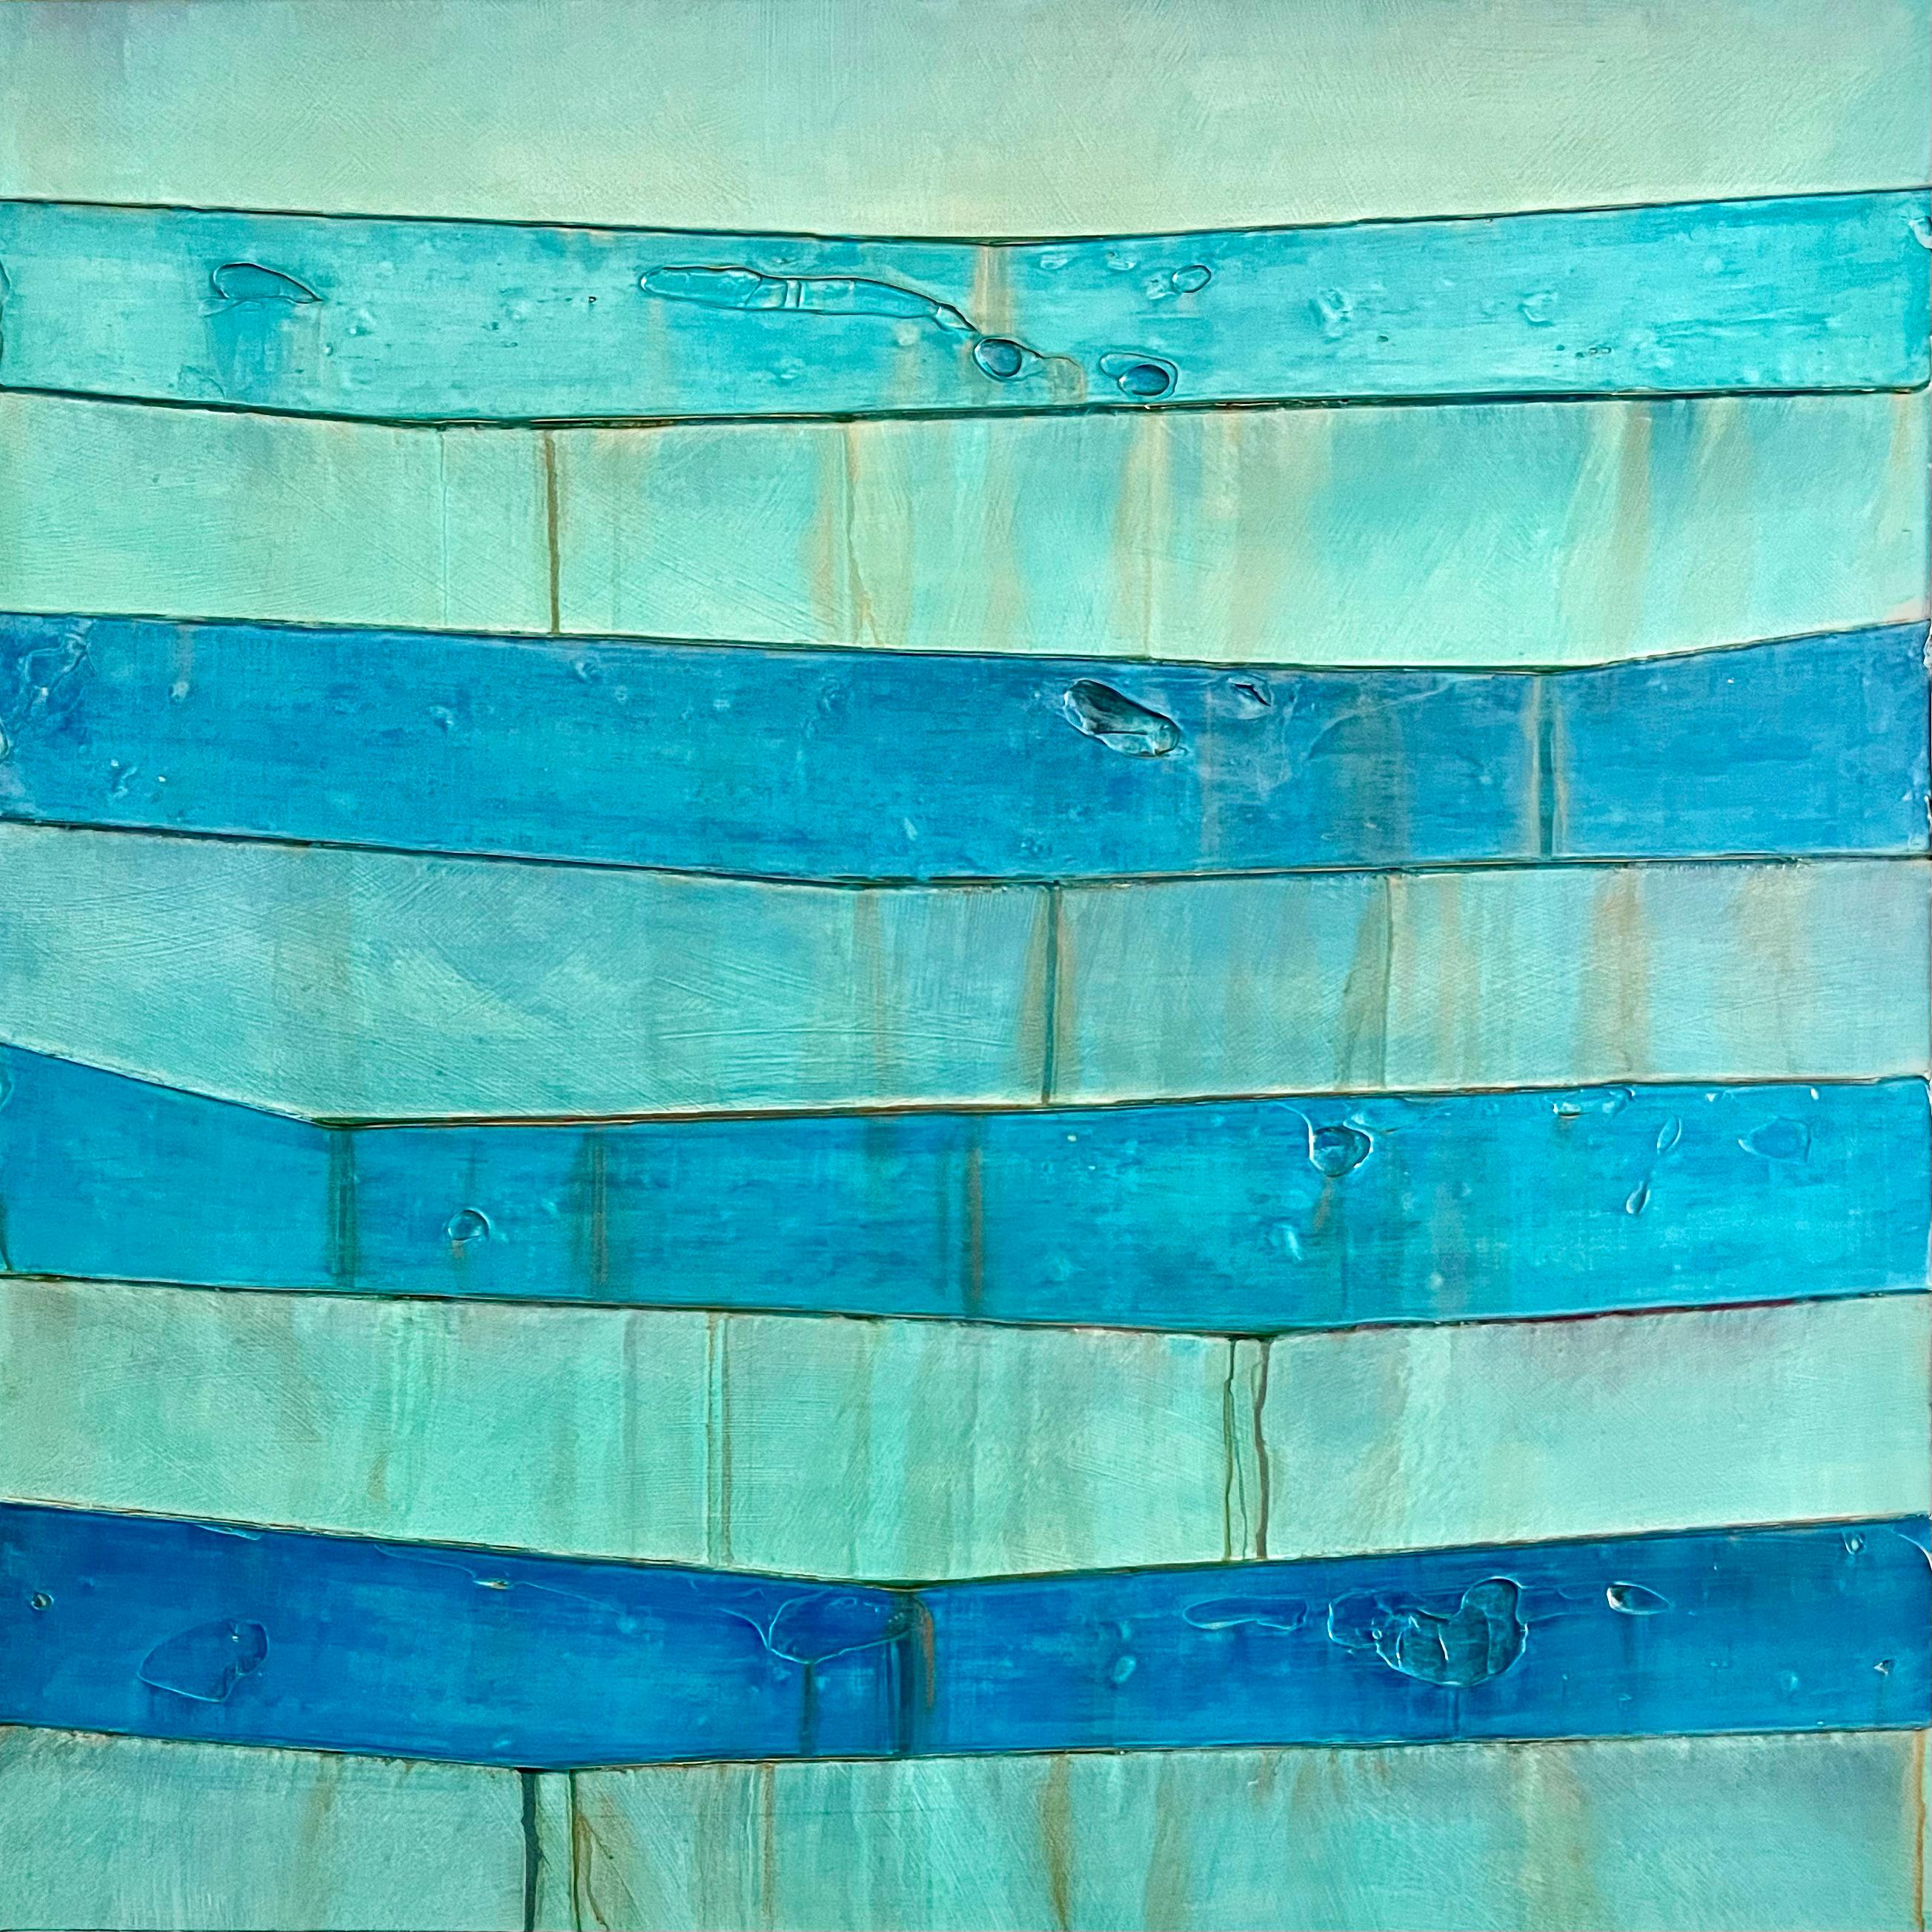 Juan Alonso-Rodríguez Abstract Painting - CABANA 3 - blue and aquamarine abstract painting by Cuban-American artist